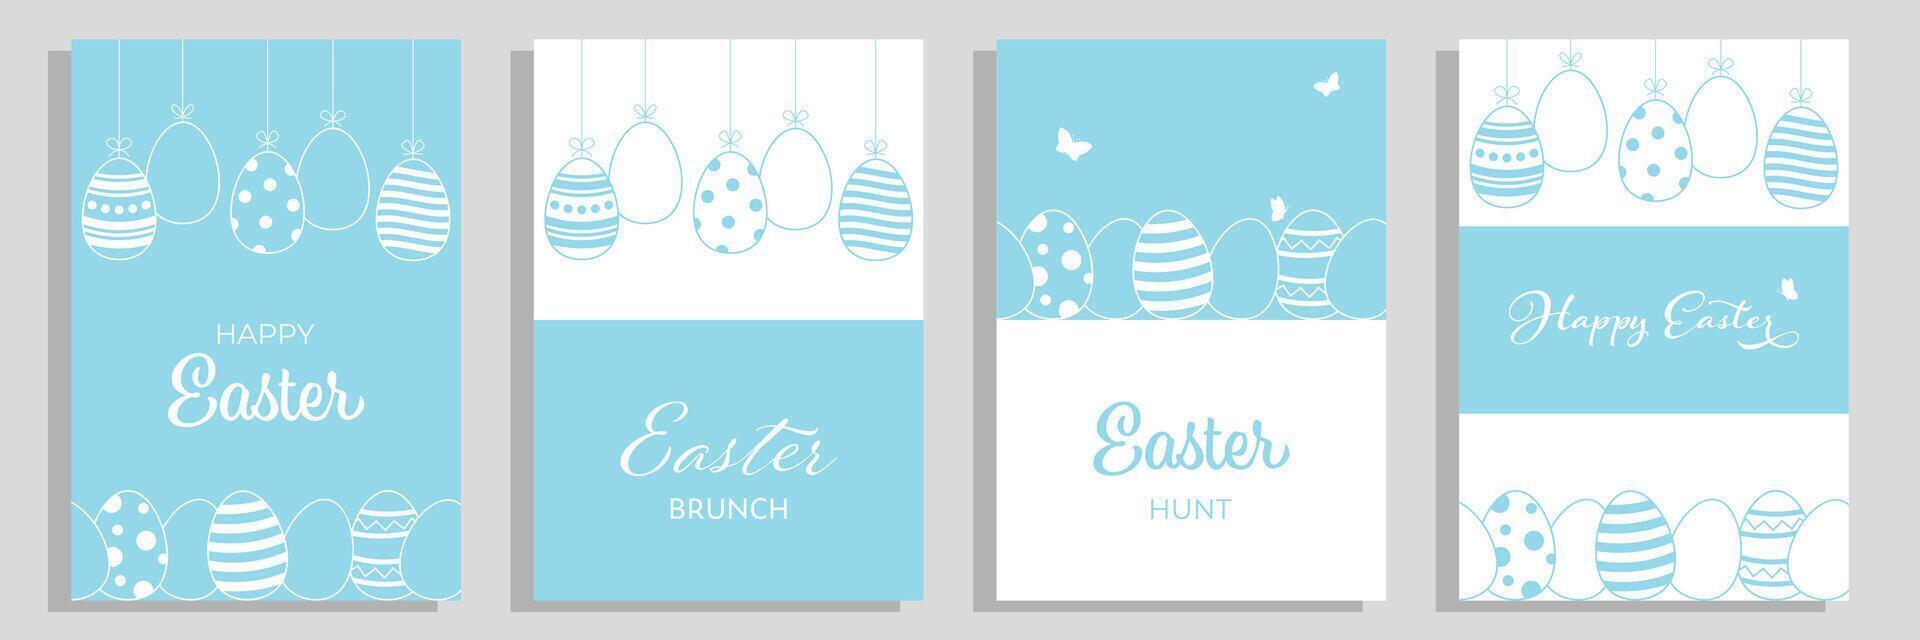 Happy Easter greeting cards set. vector